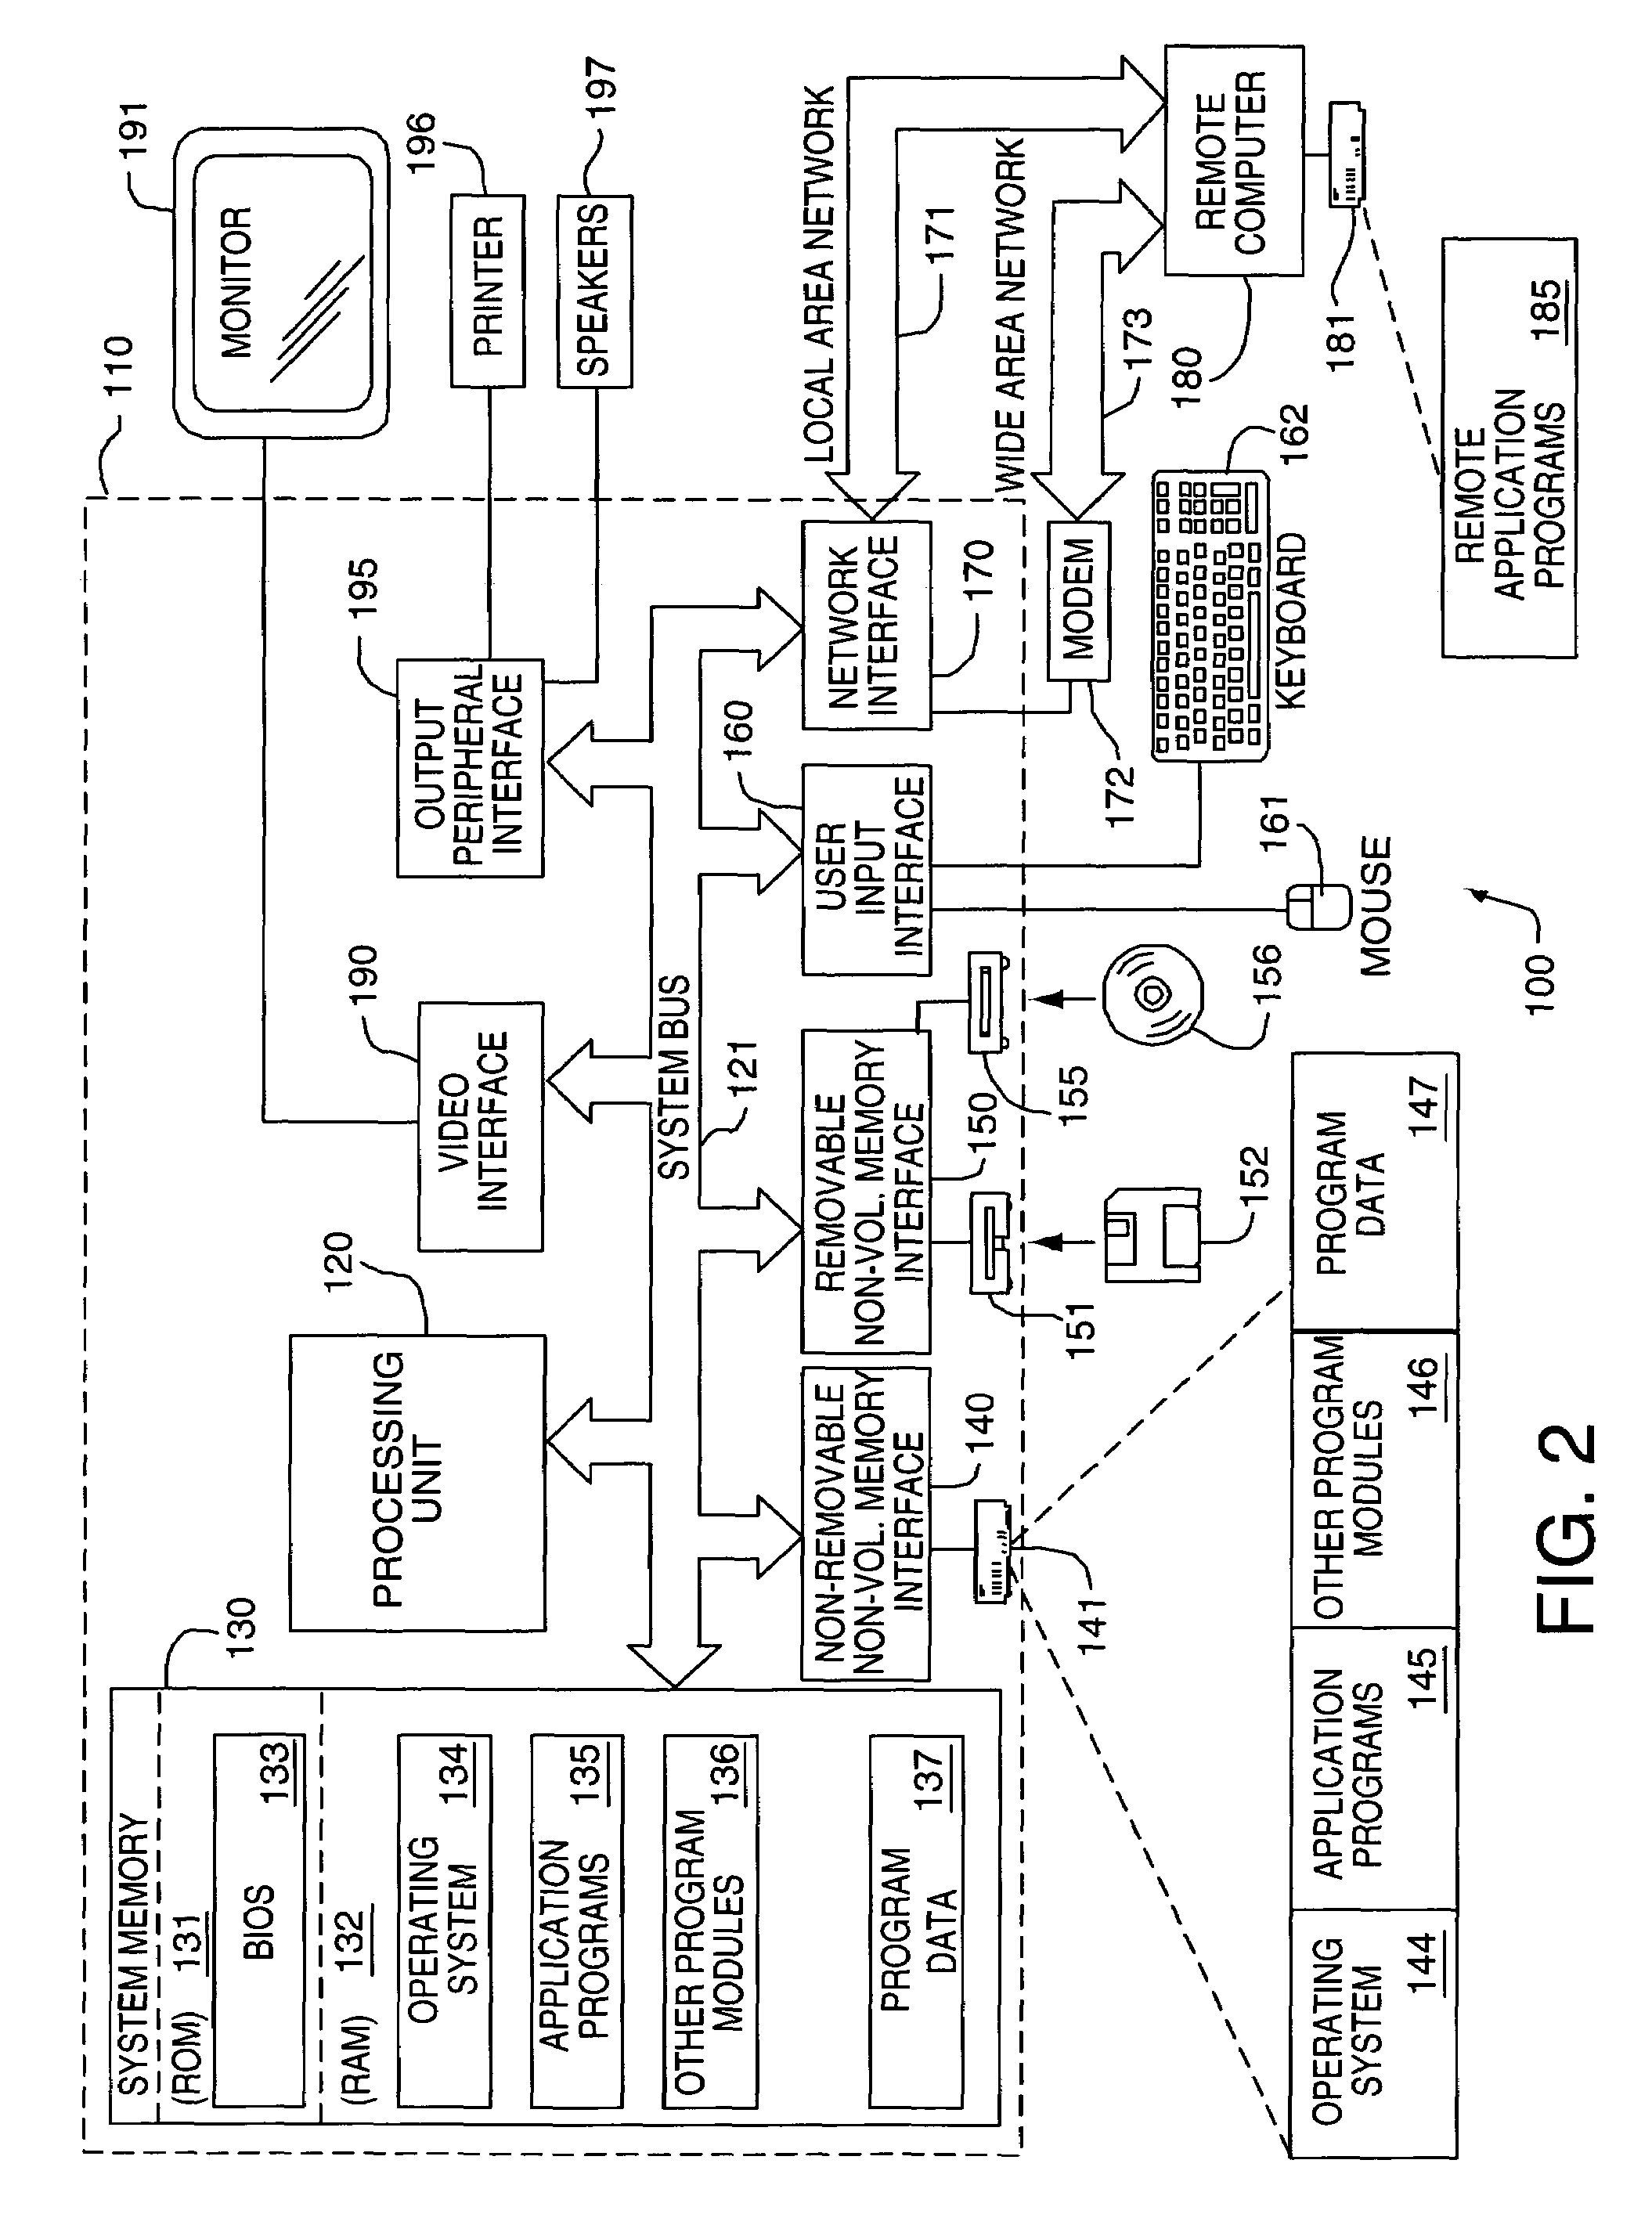 System and method for automatic configuration